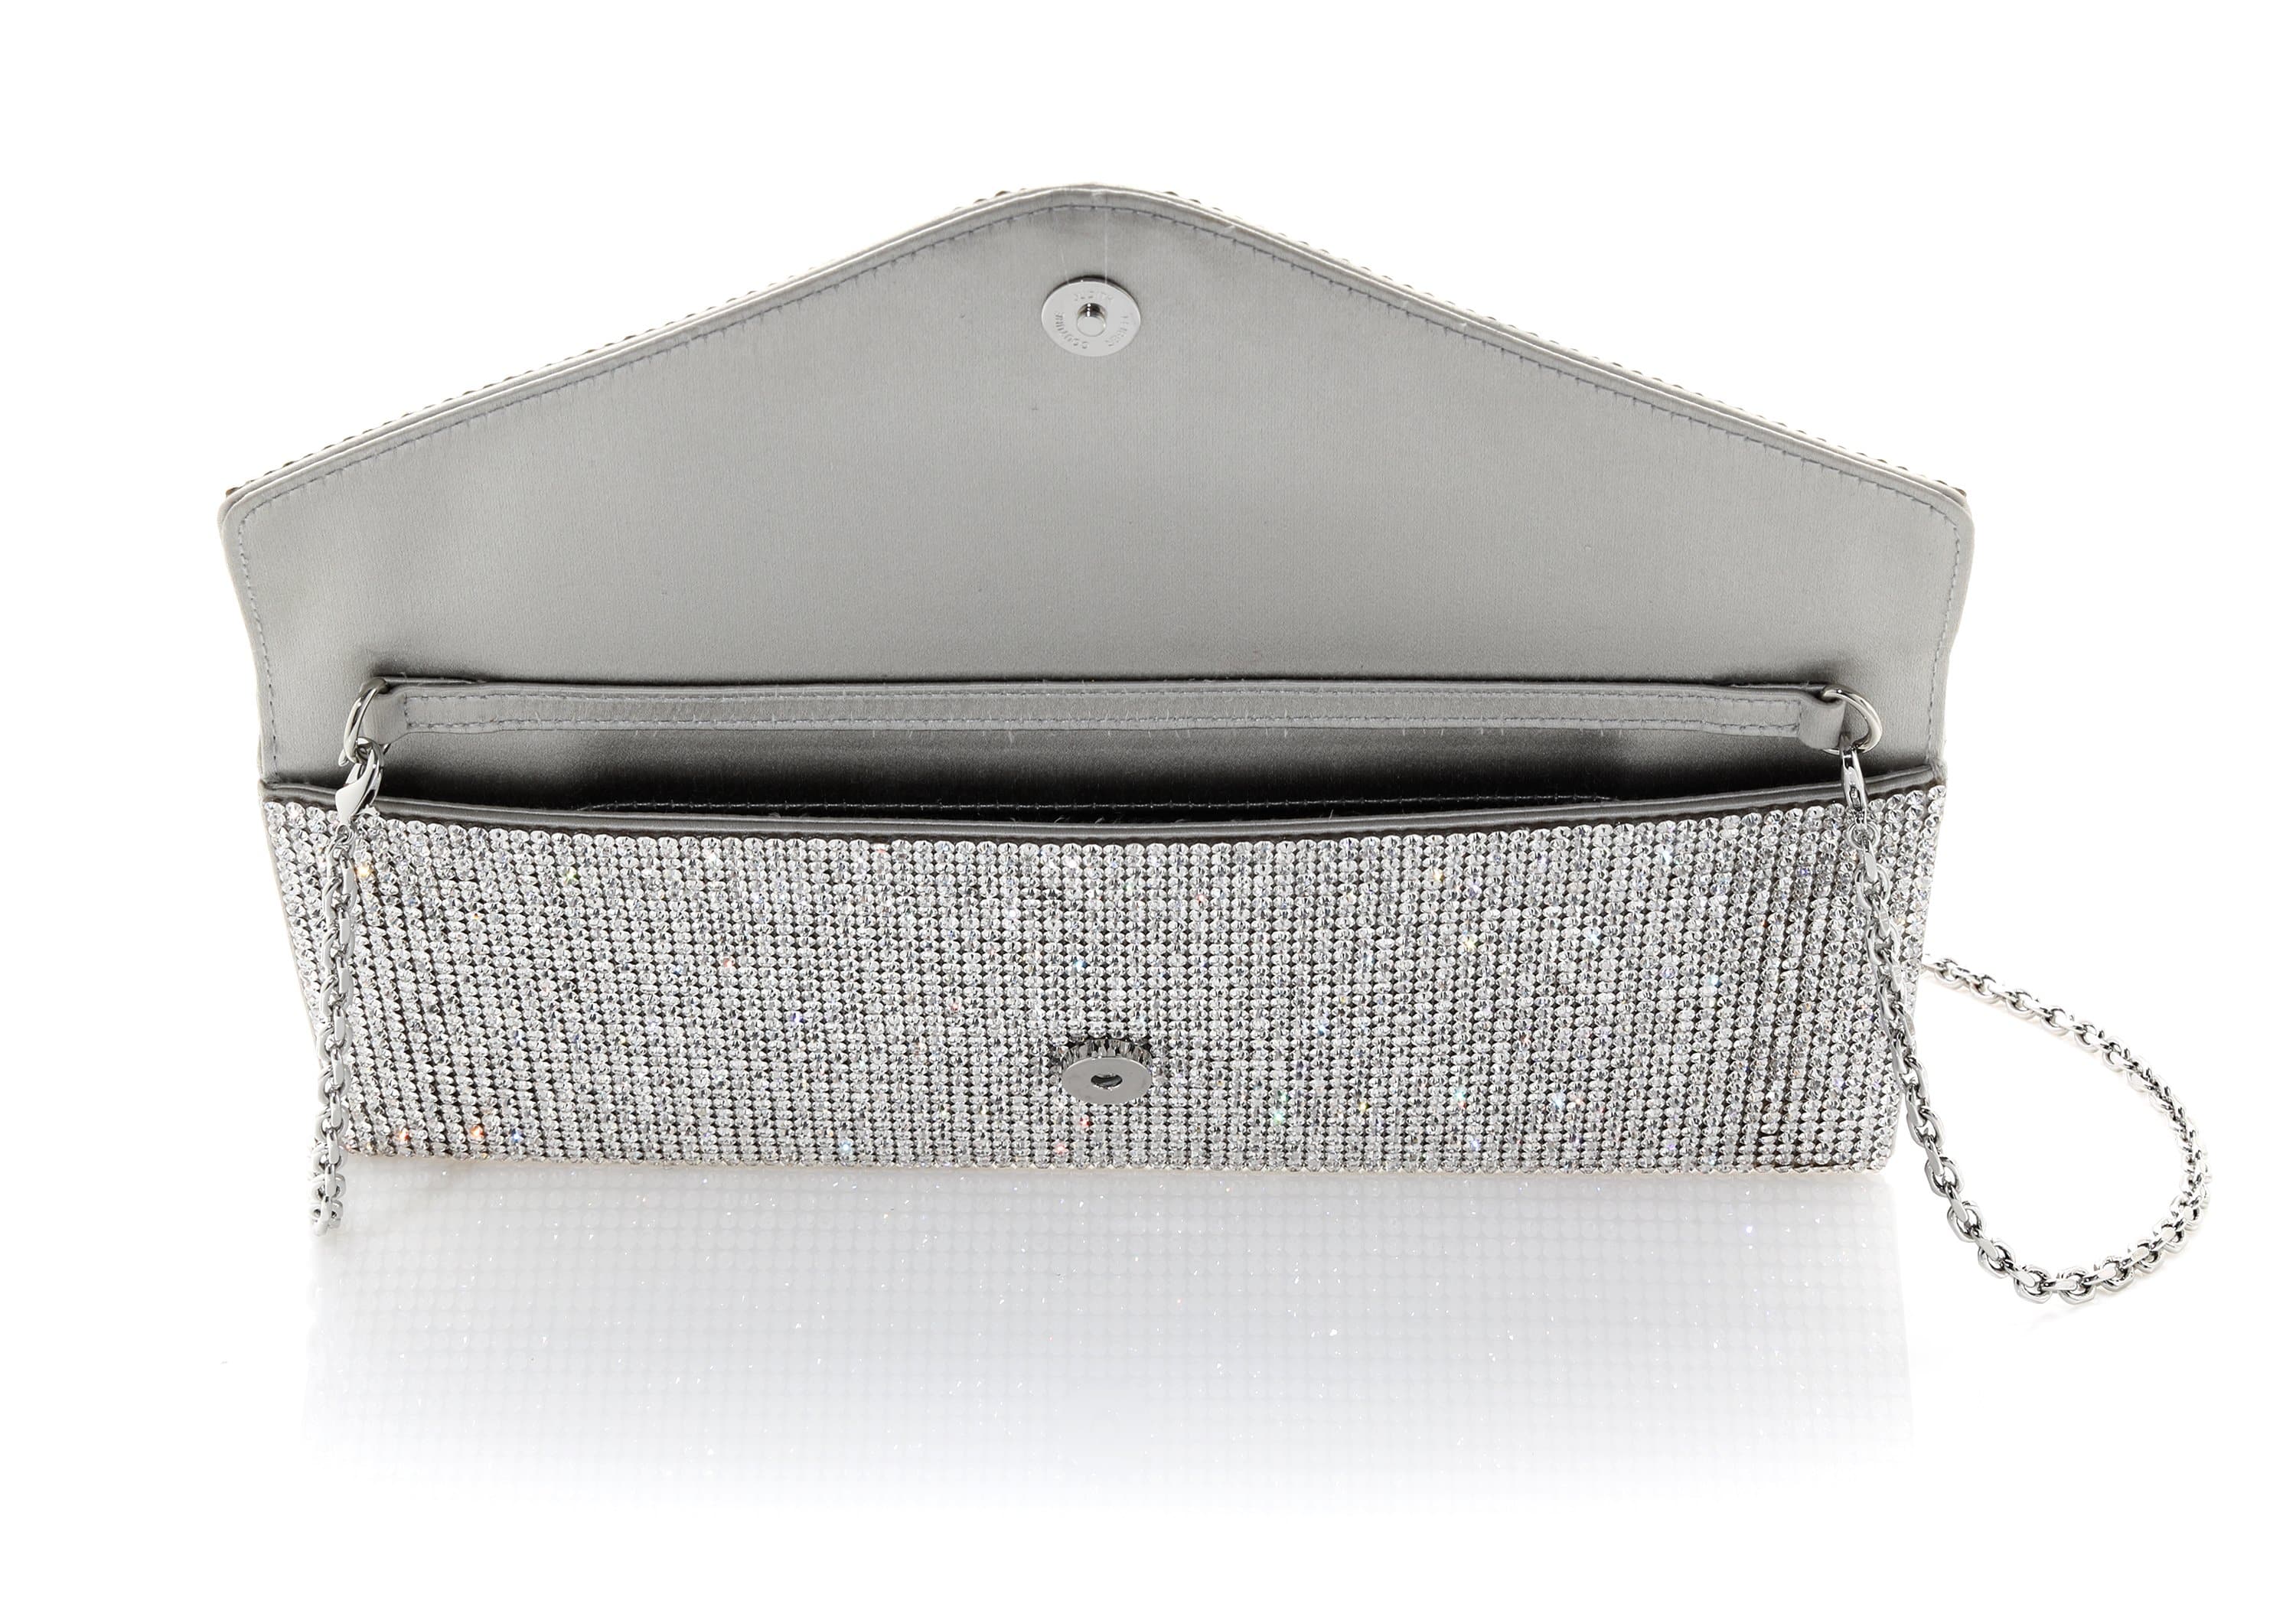 JUDITH LEIBER COUTURE Hot Lips crystal-embellished silver-tone clutch